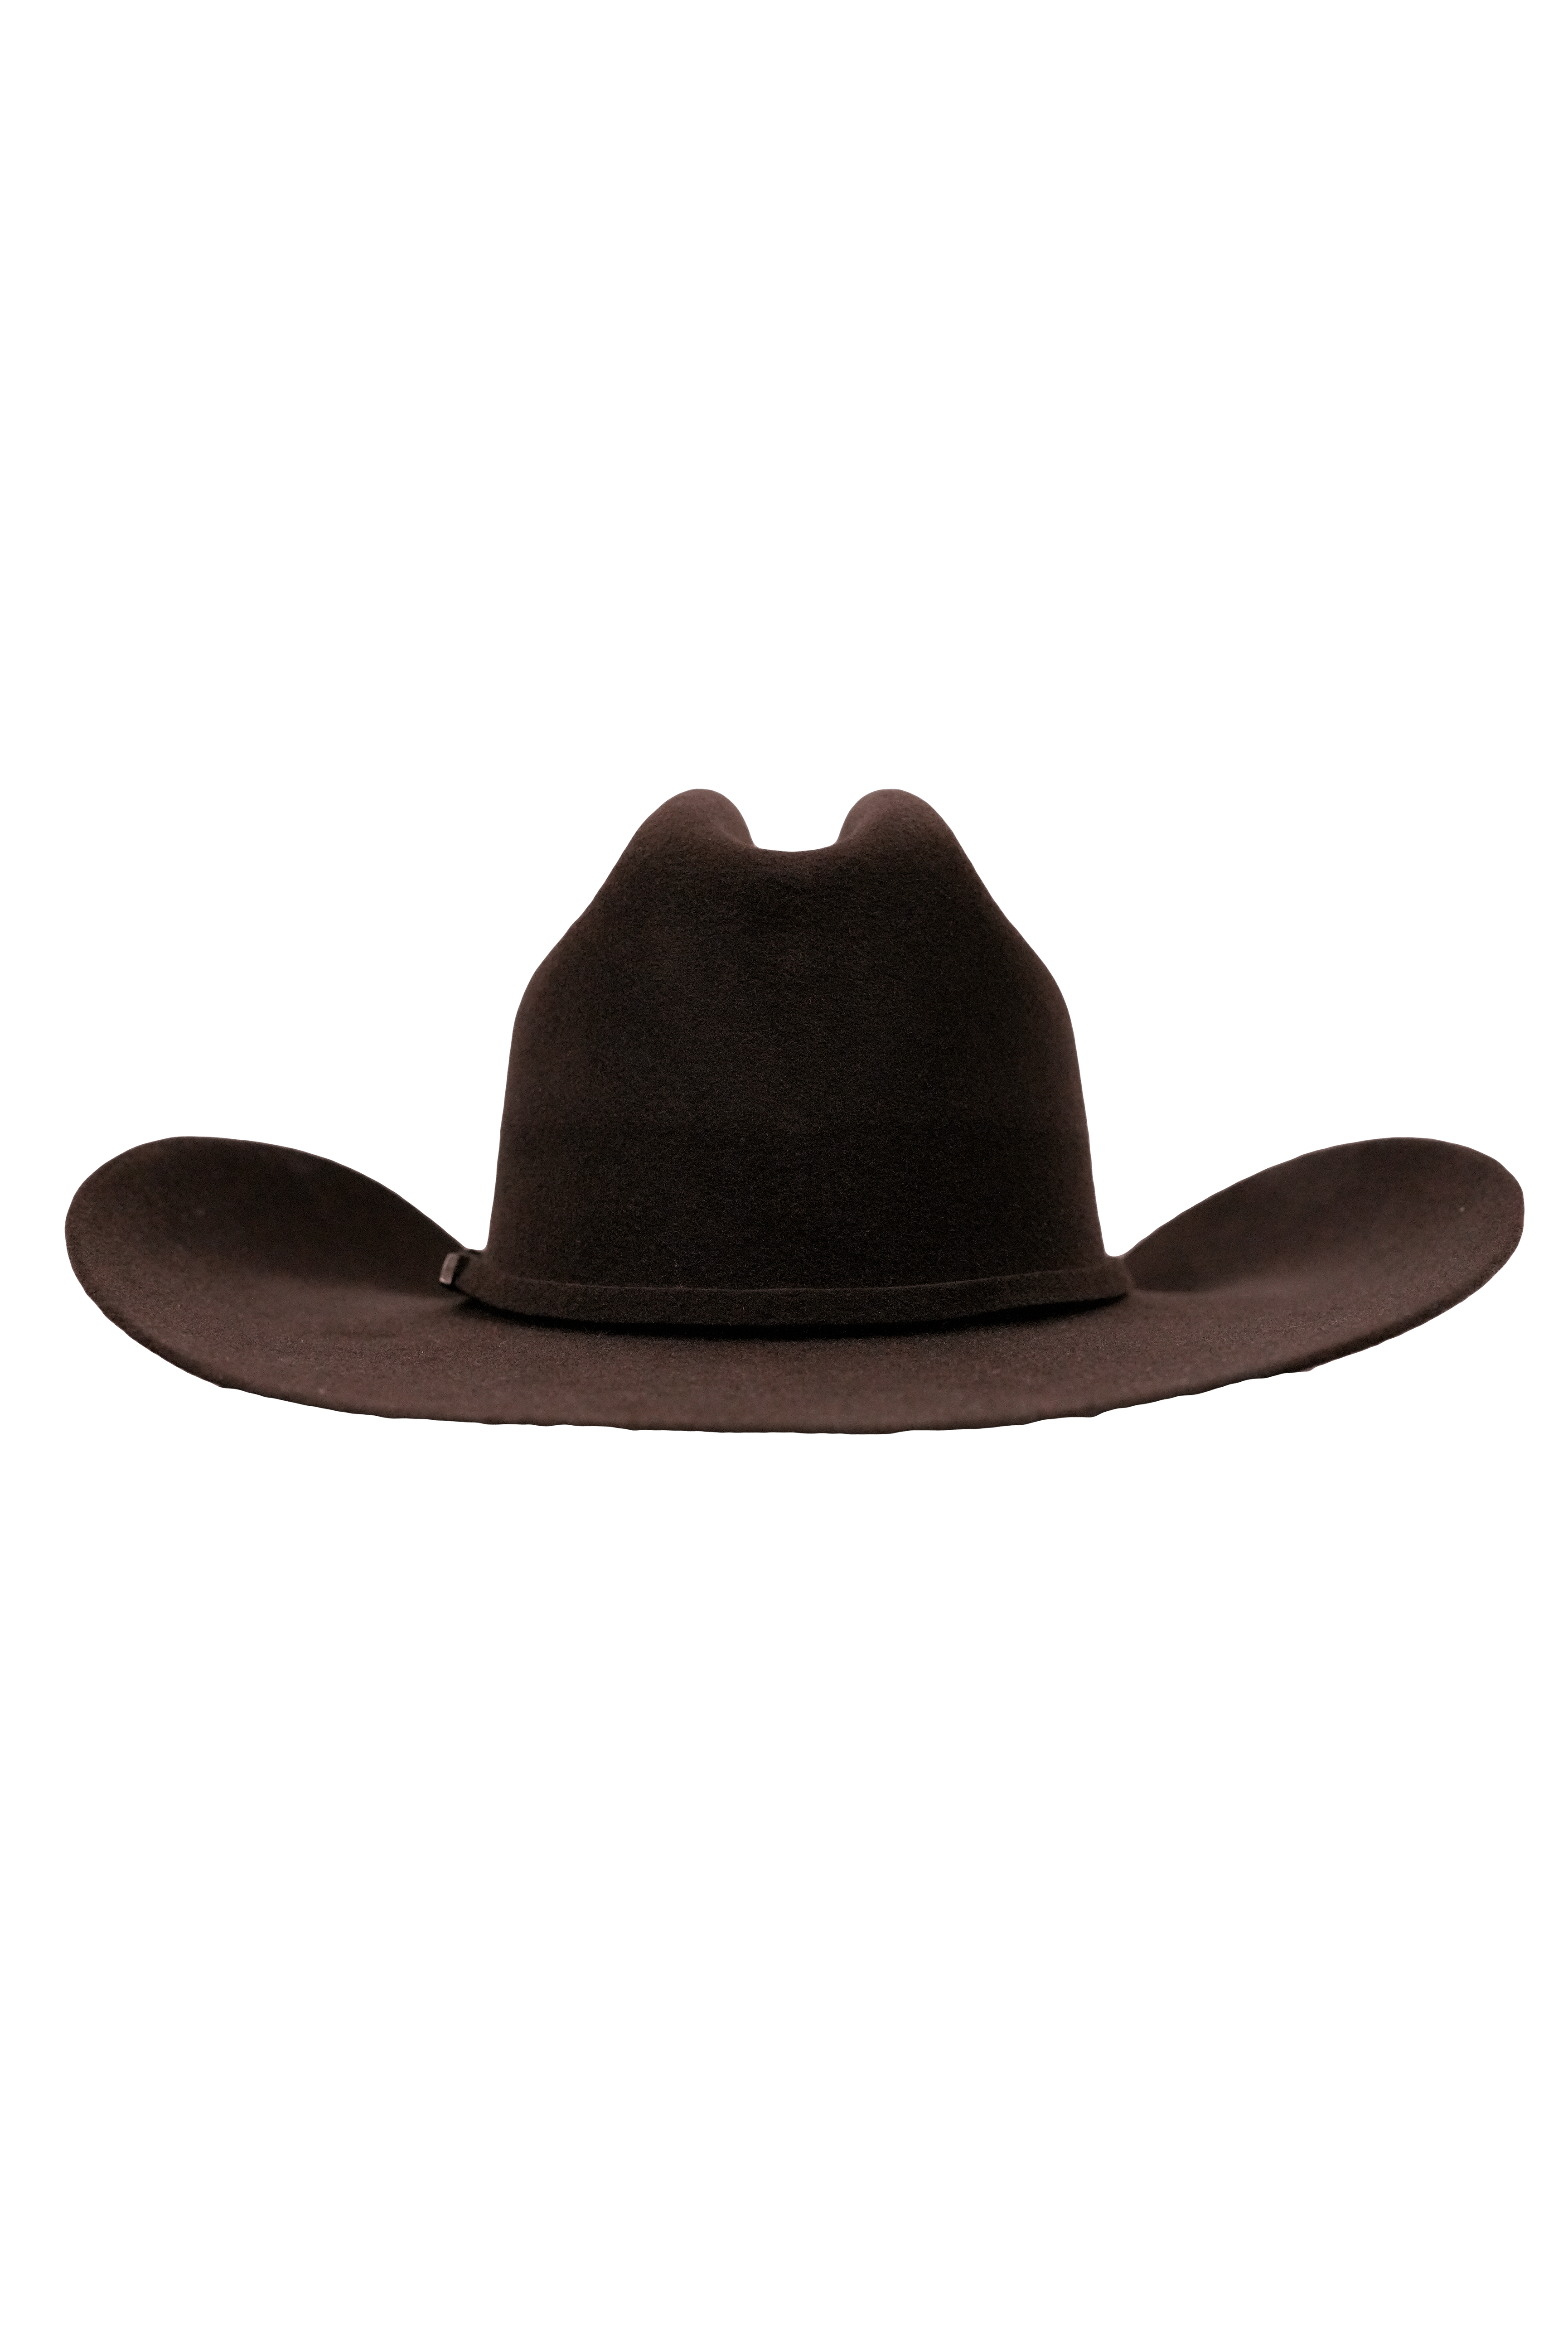 The Boot Jack 3x Chocolate Ranger Hat